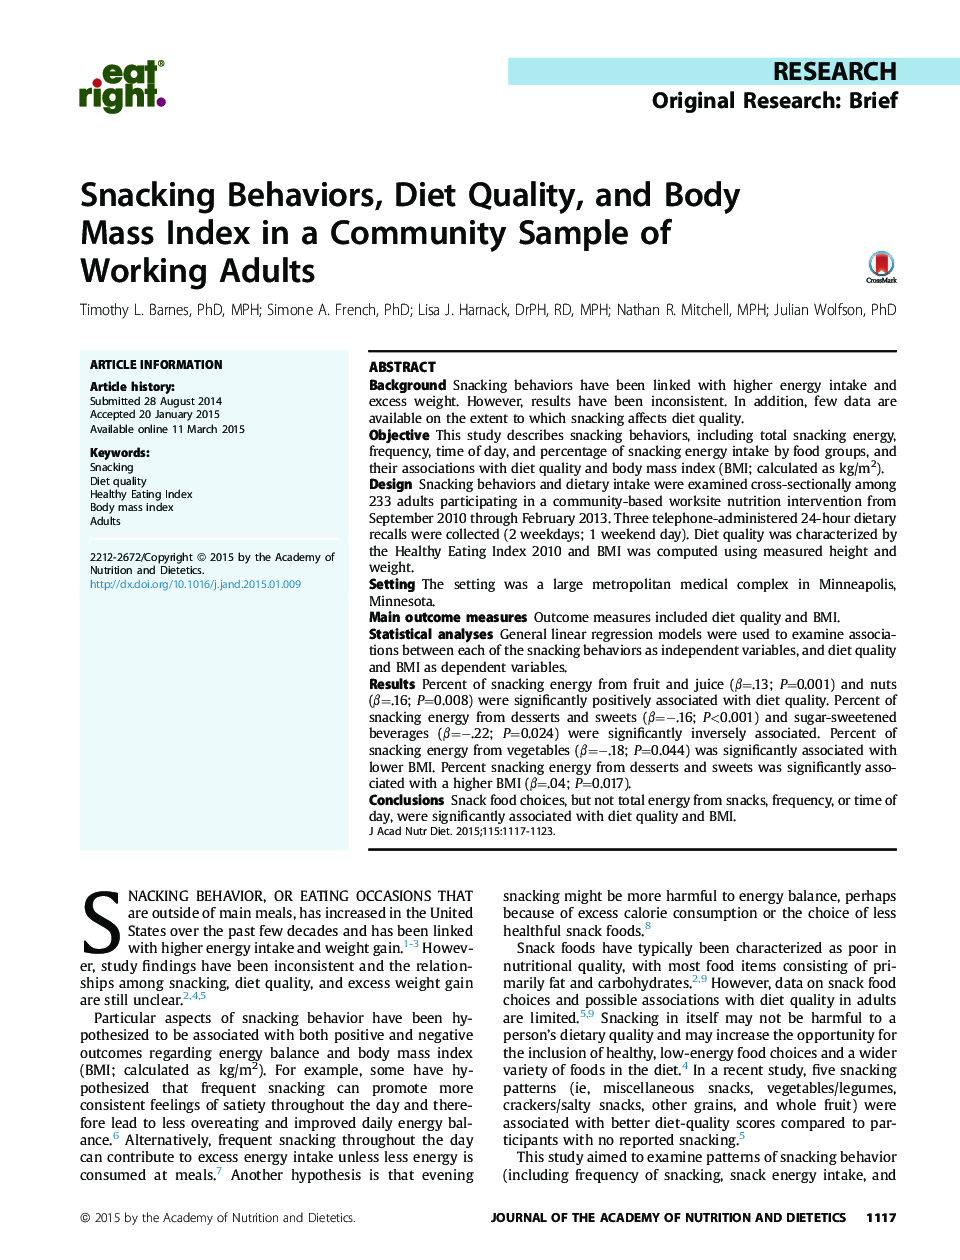 Snacking Behaviors, Diet Quality, and Body Mass Index in a Community Sample of Working Adults 